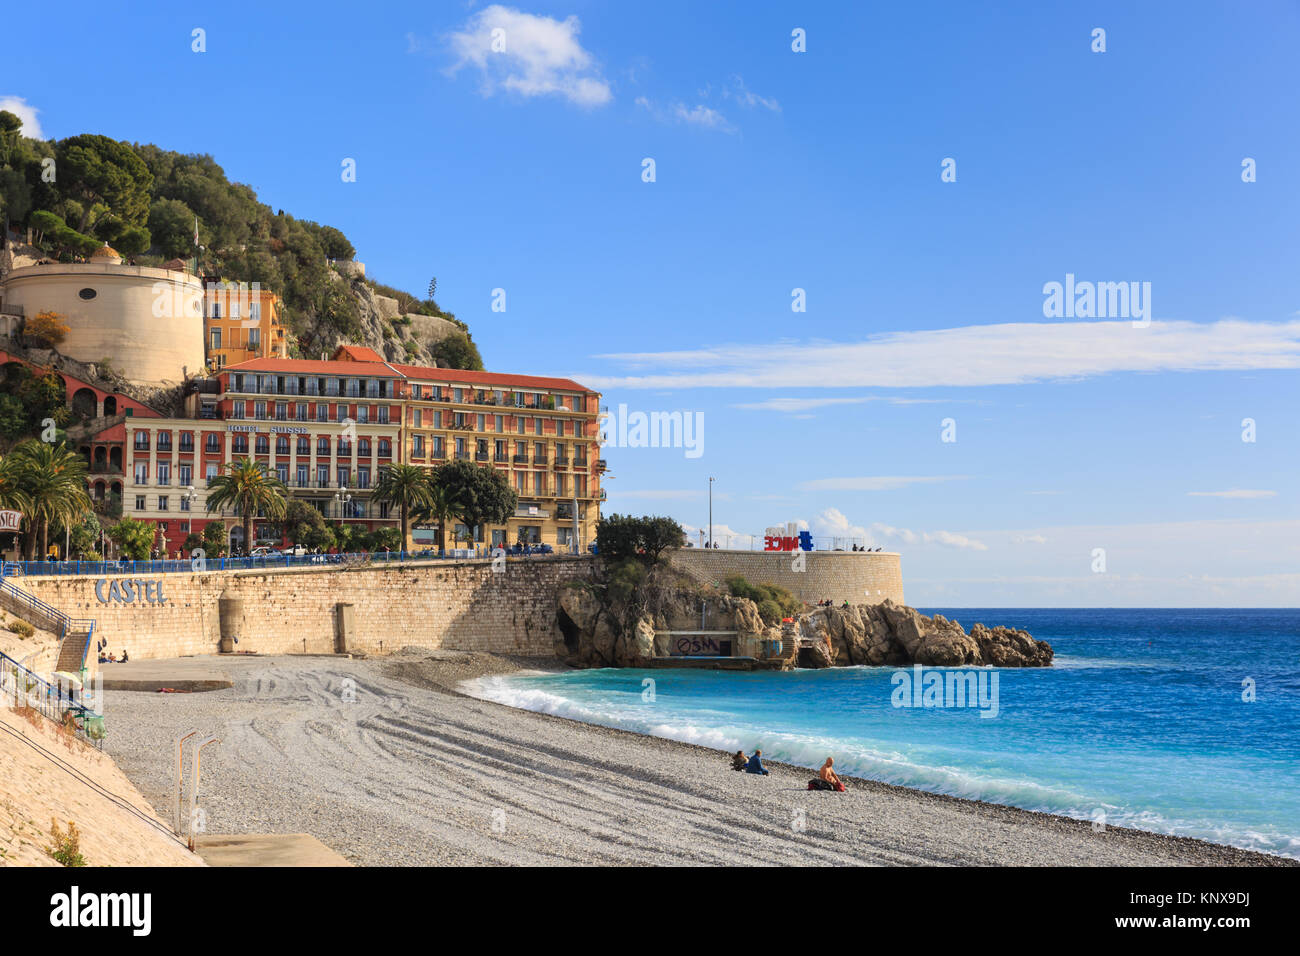 Hotel Suisse and Castel beach, Nice, French Riviera, Cote d'Azur, France Stock Photo